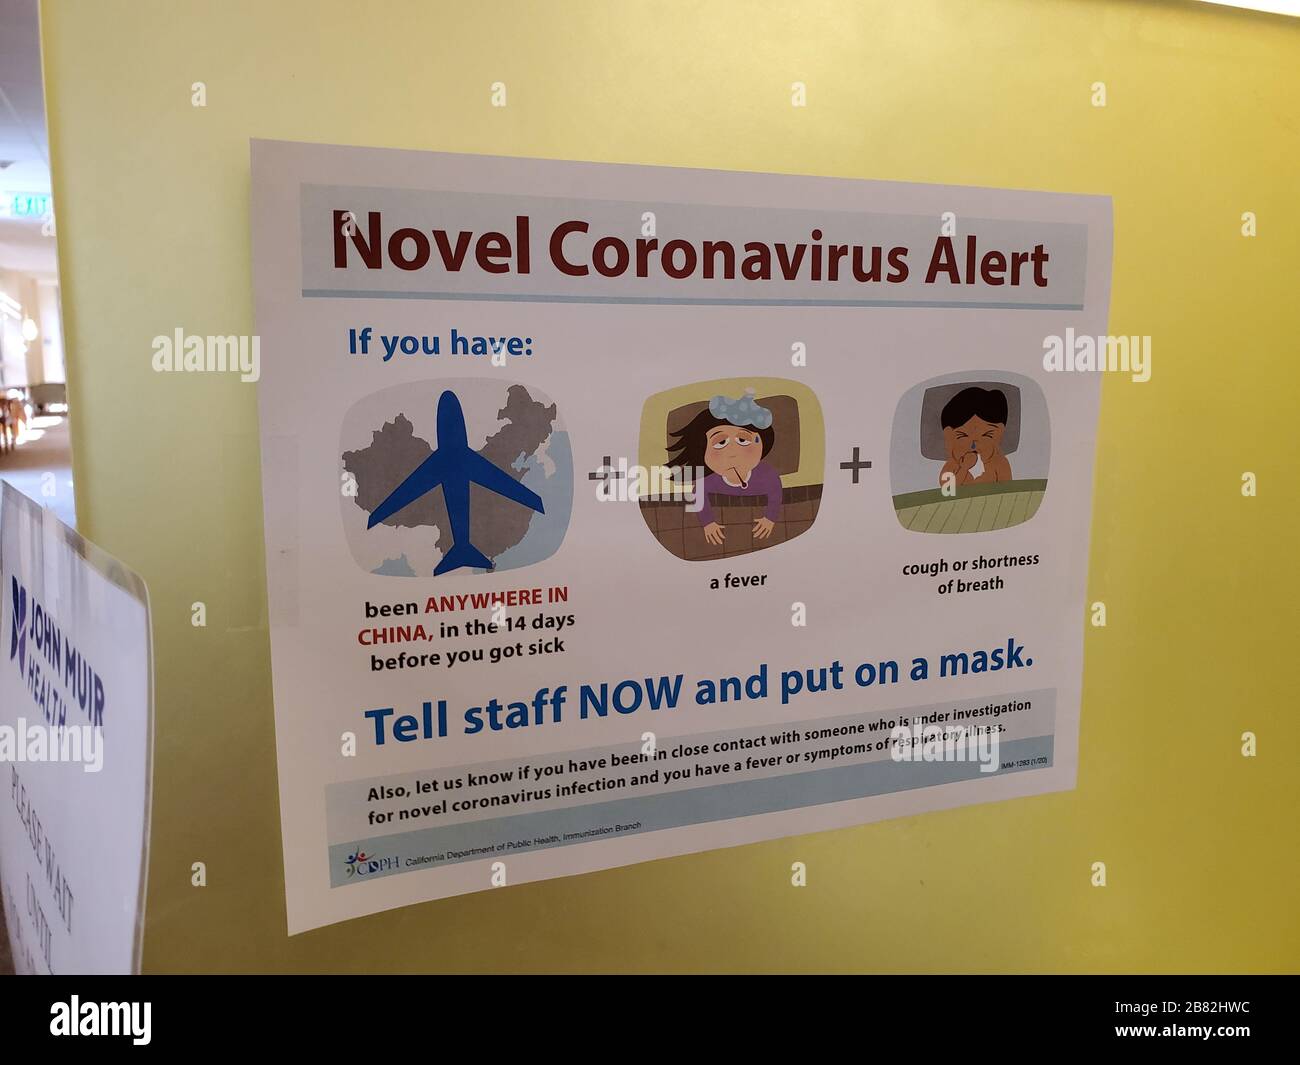 Warning sign with text reading 'Novel Coronavirus Alert', referring to quarantine and screening procedures for patients with possible exposure to a novel coronavirus spreading in China, at a John Muir Health medical center in Walnut Creek, California, February 9, 2020. () Stock Photo